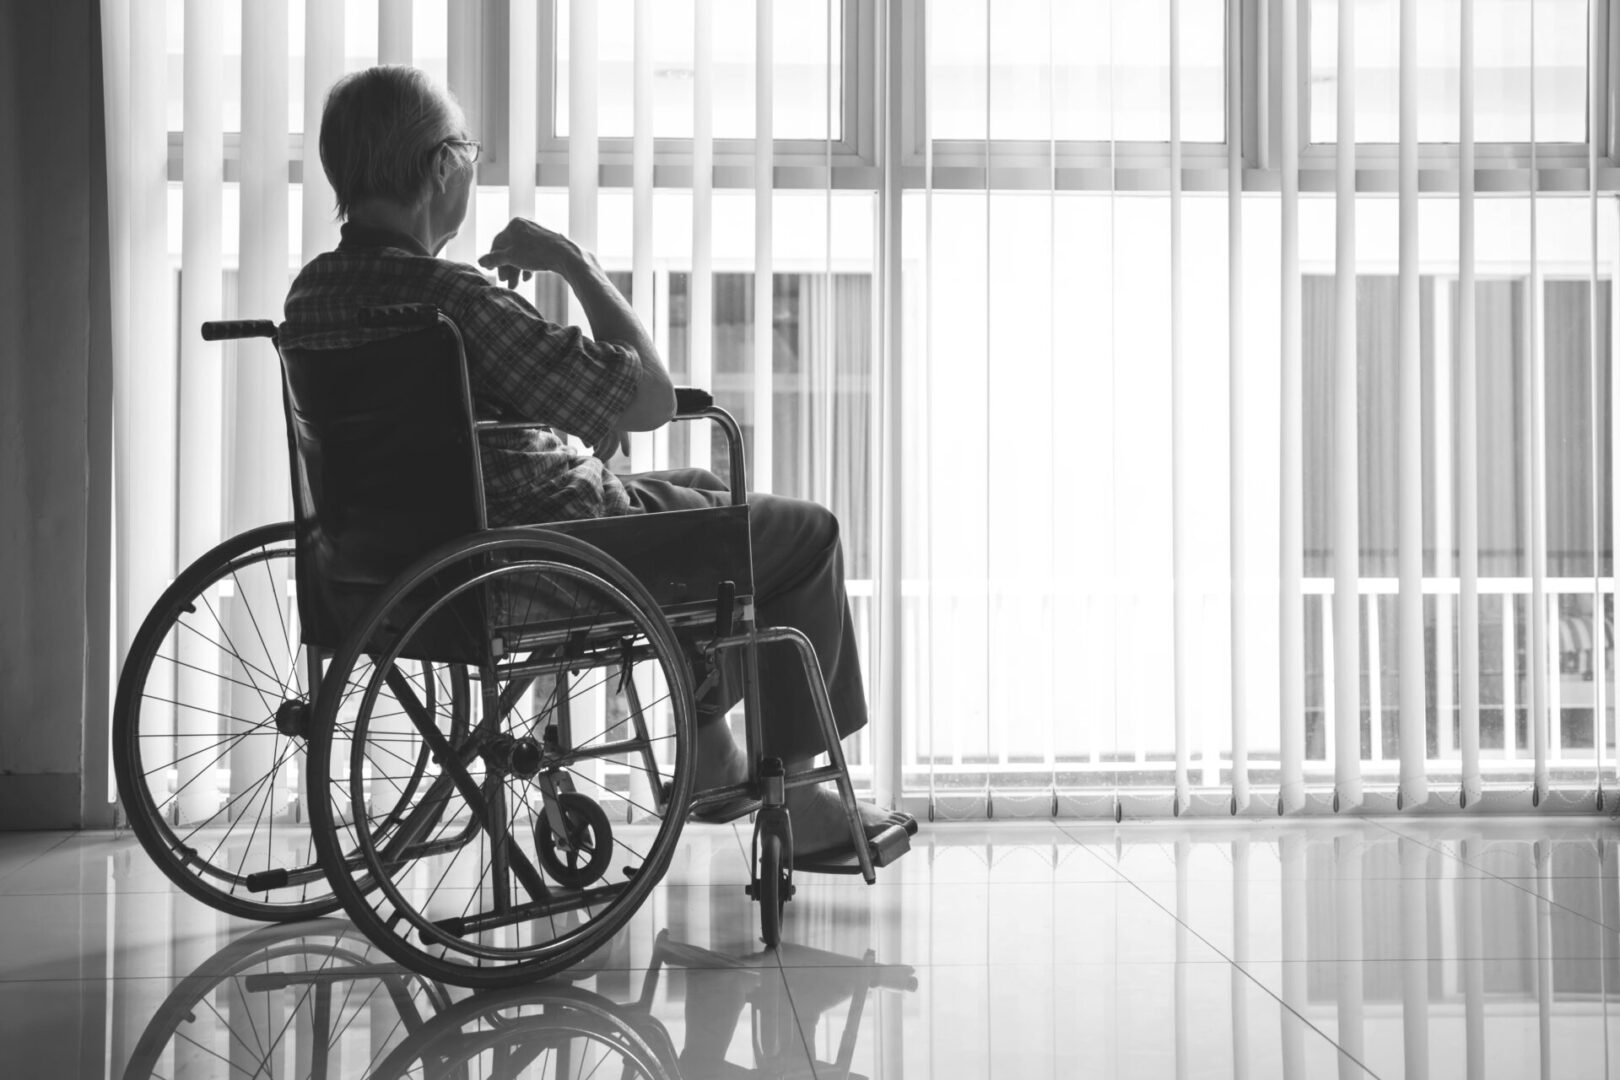 A man in a wheelchair looking out the window.